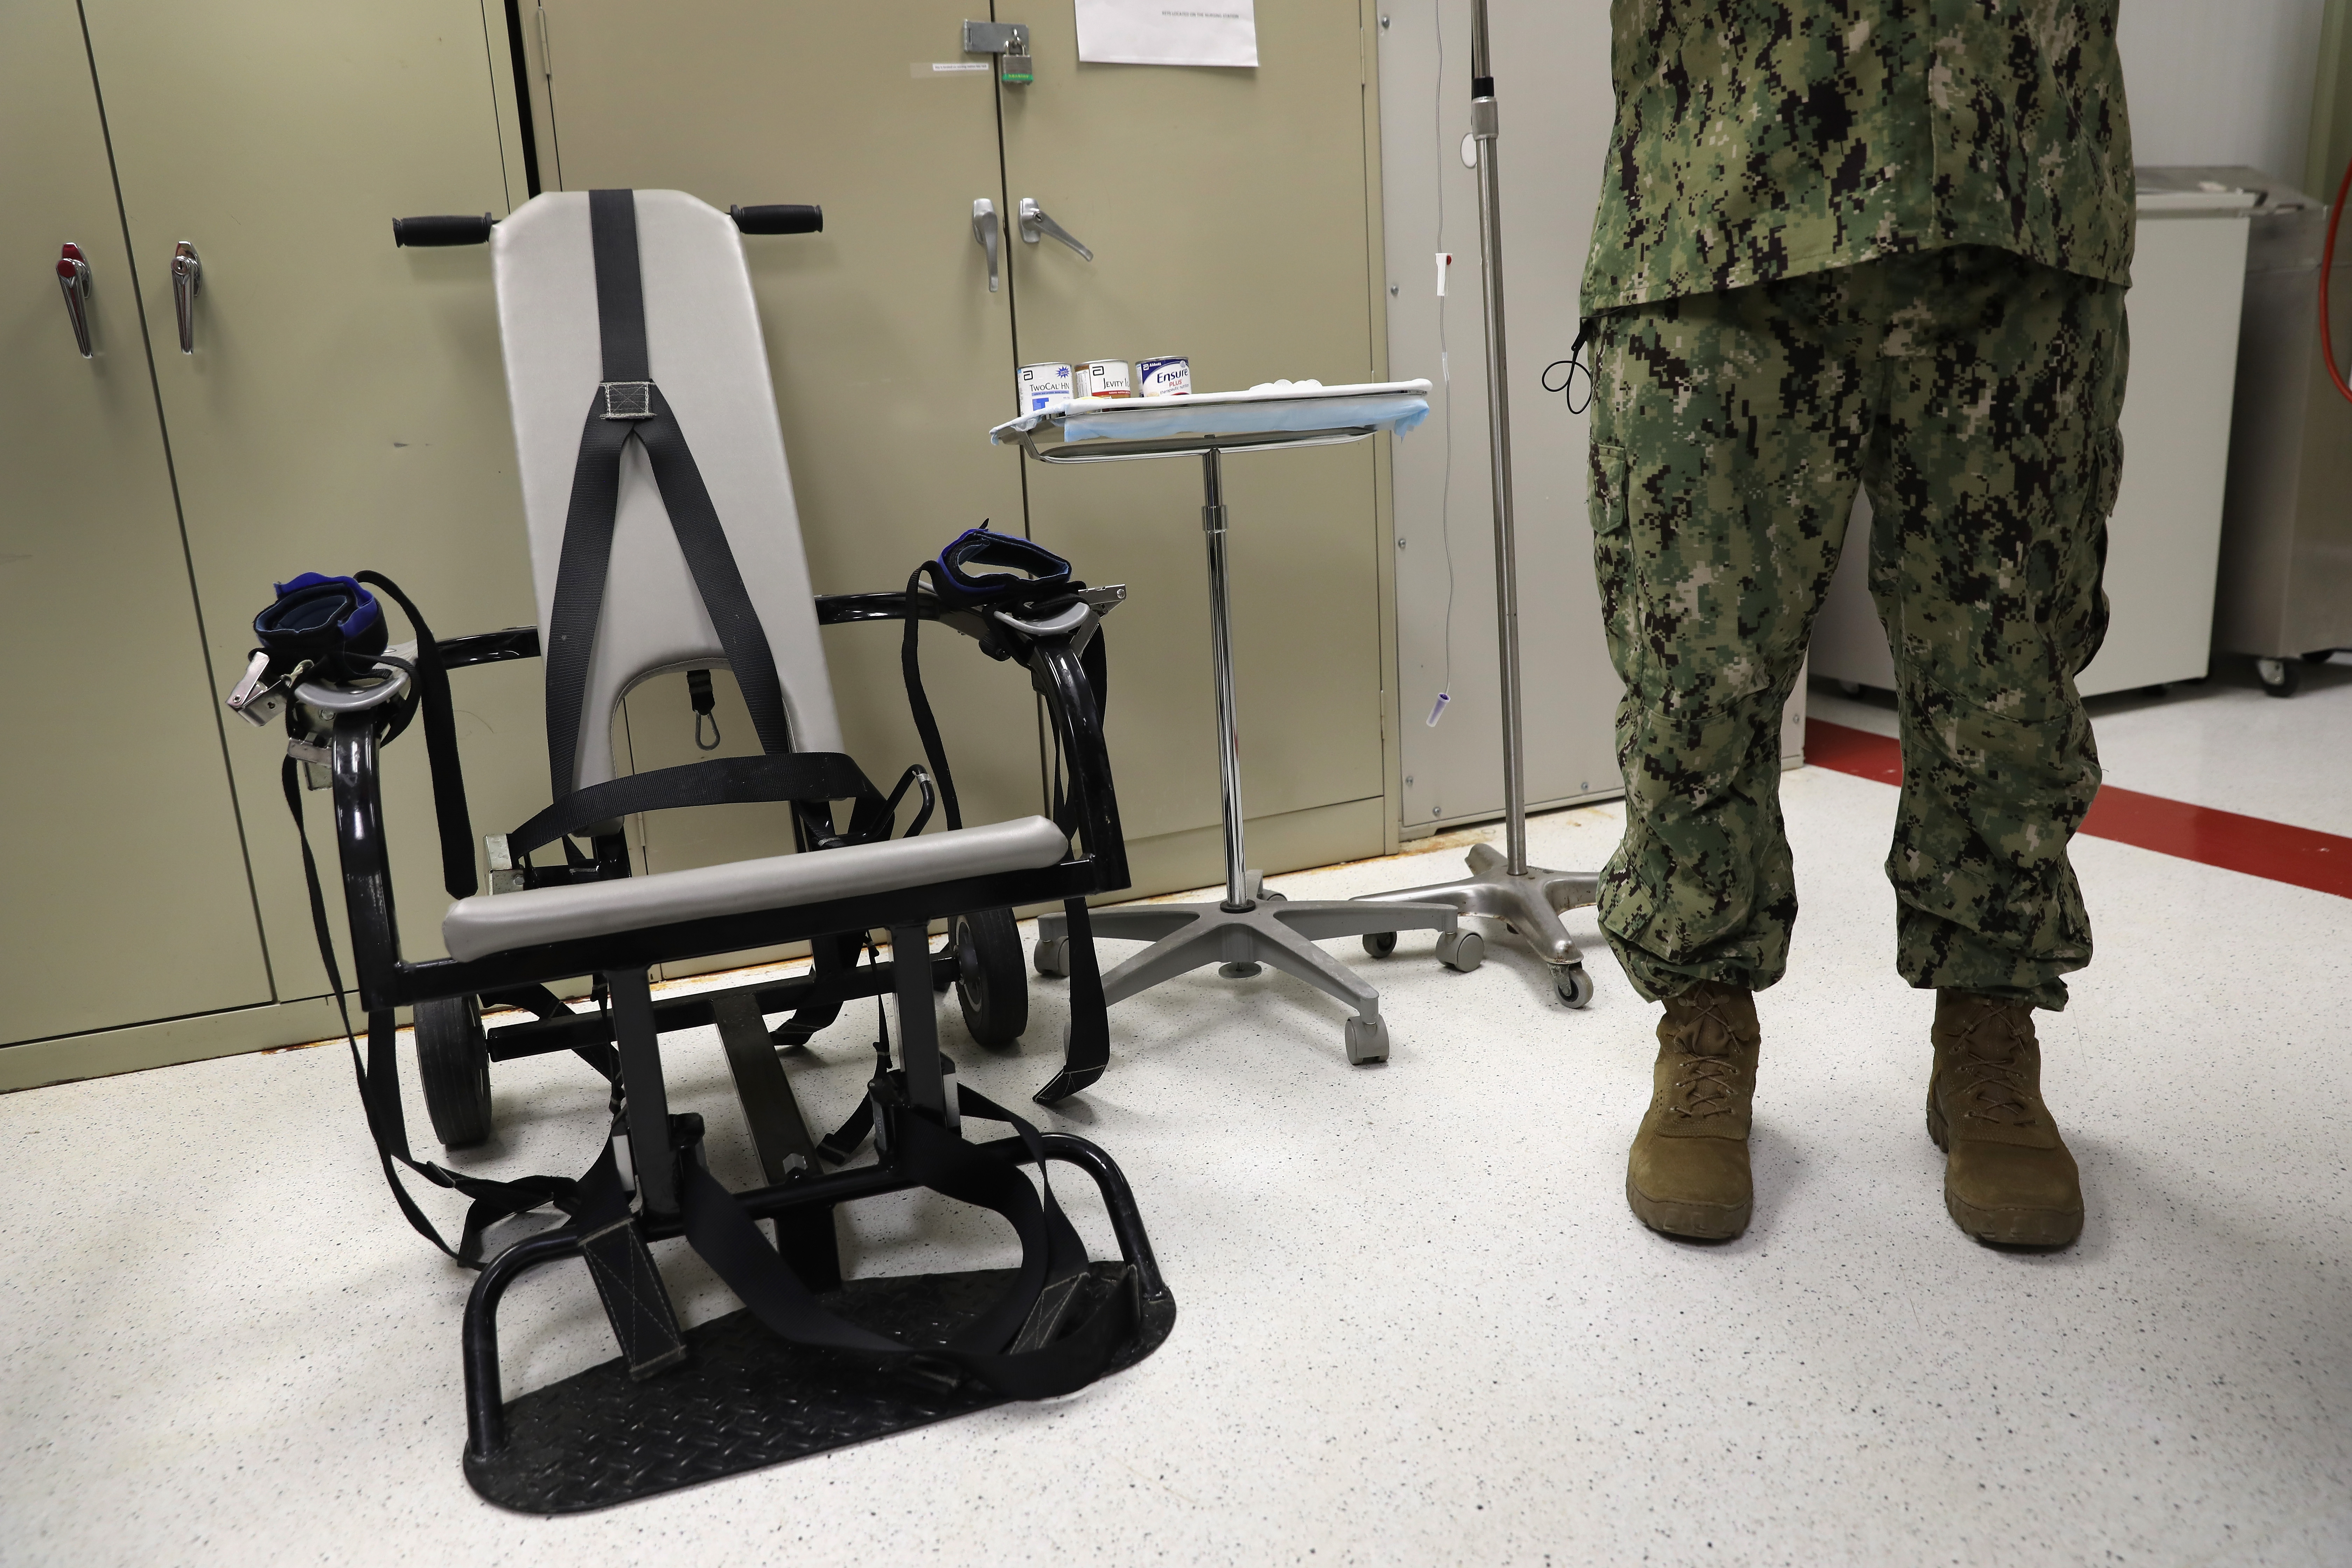 A U.S. Navy doctor stands near a restraint chair in the detainee clinic at Gitmo on Oct. 22, 2016.